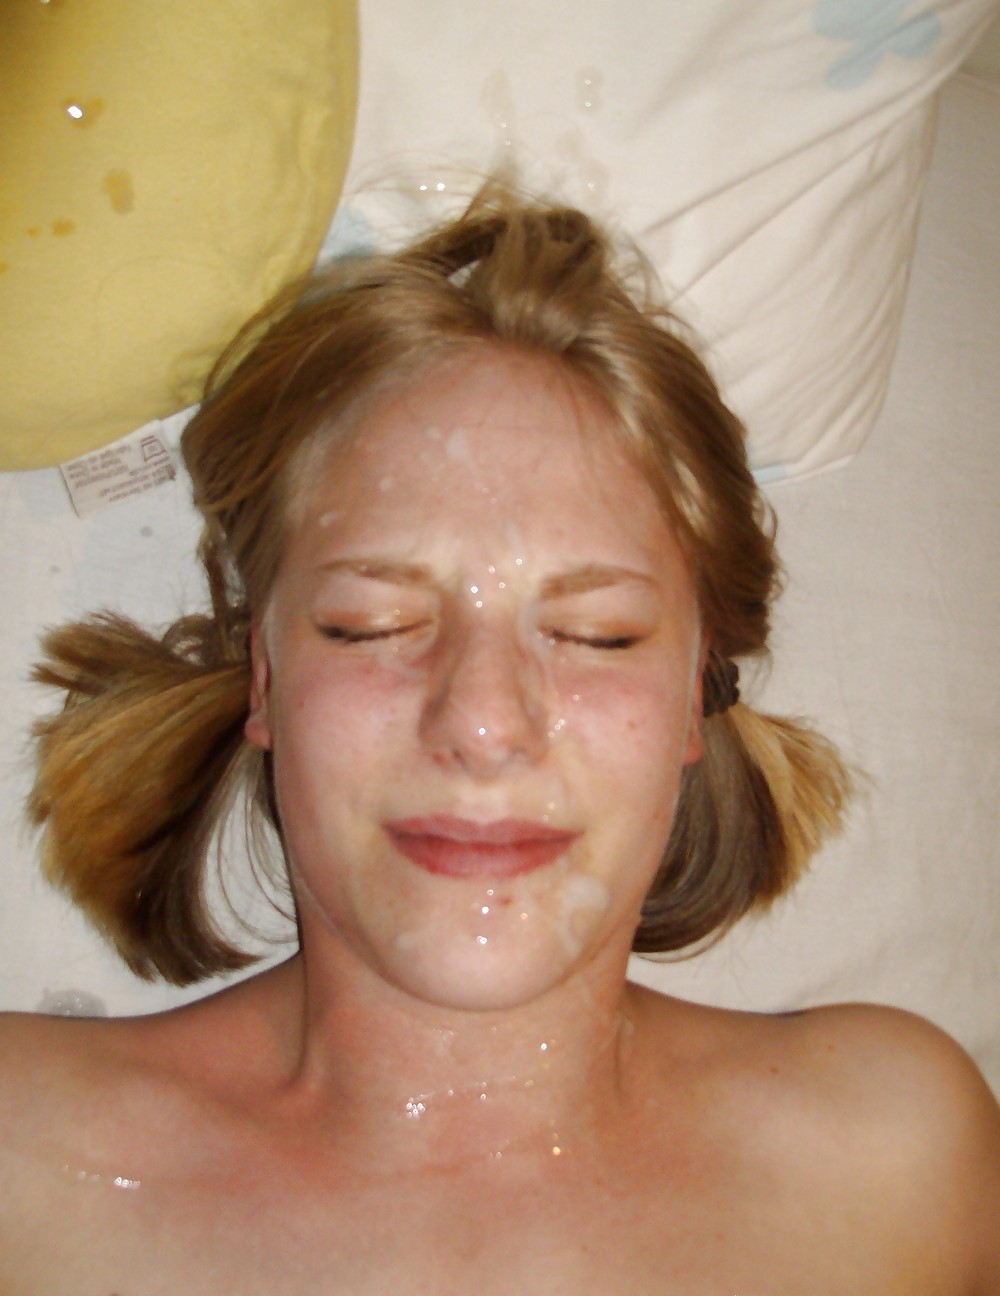 Some of our fave facials porn pictures